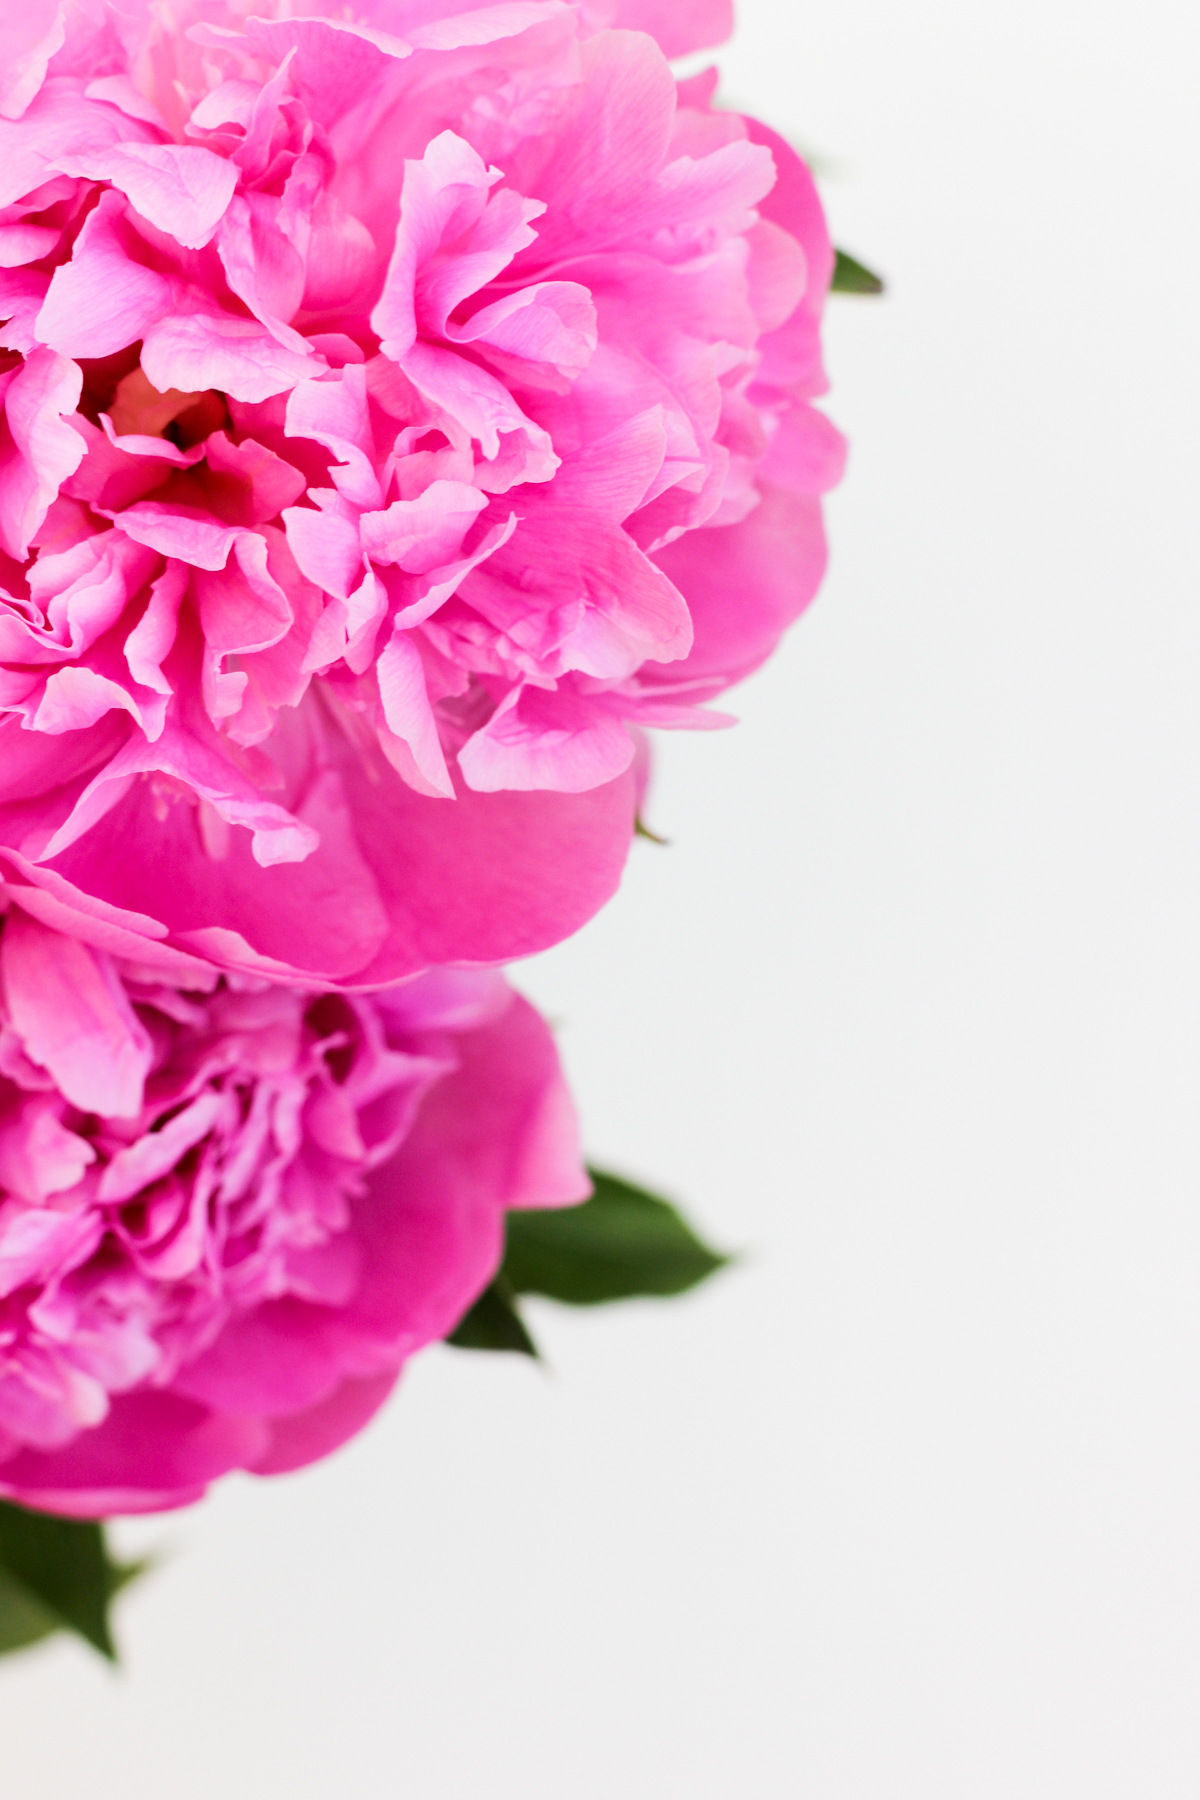 How to Plant, Grow and Care for Peonies